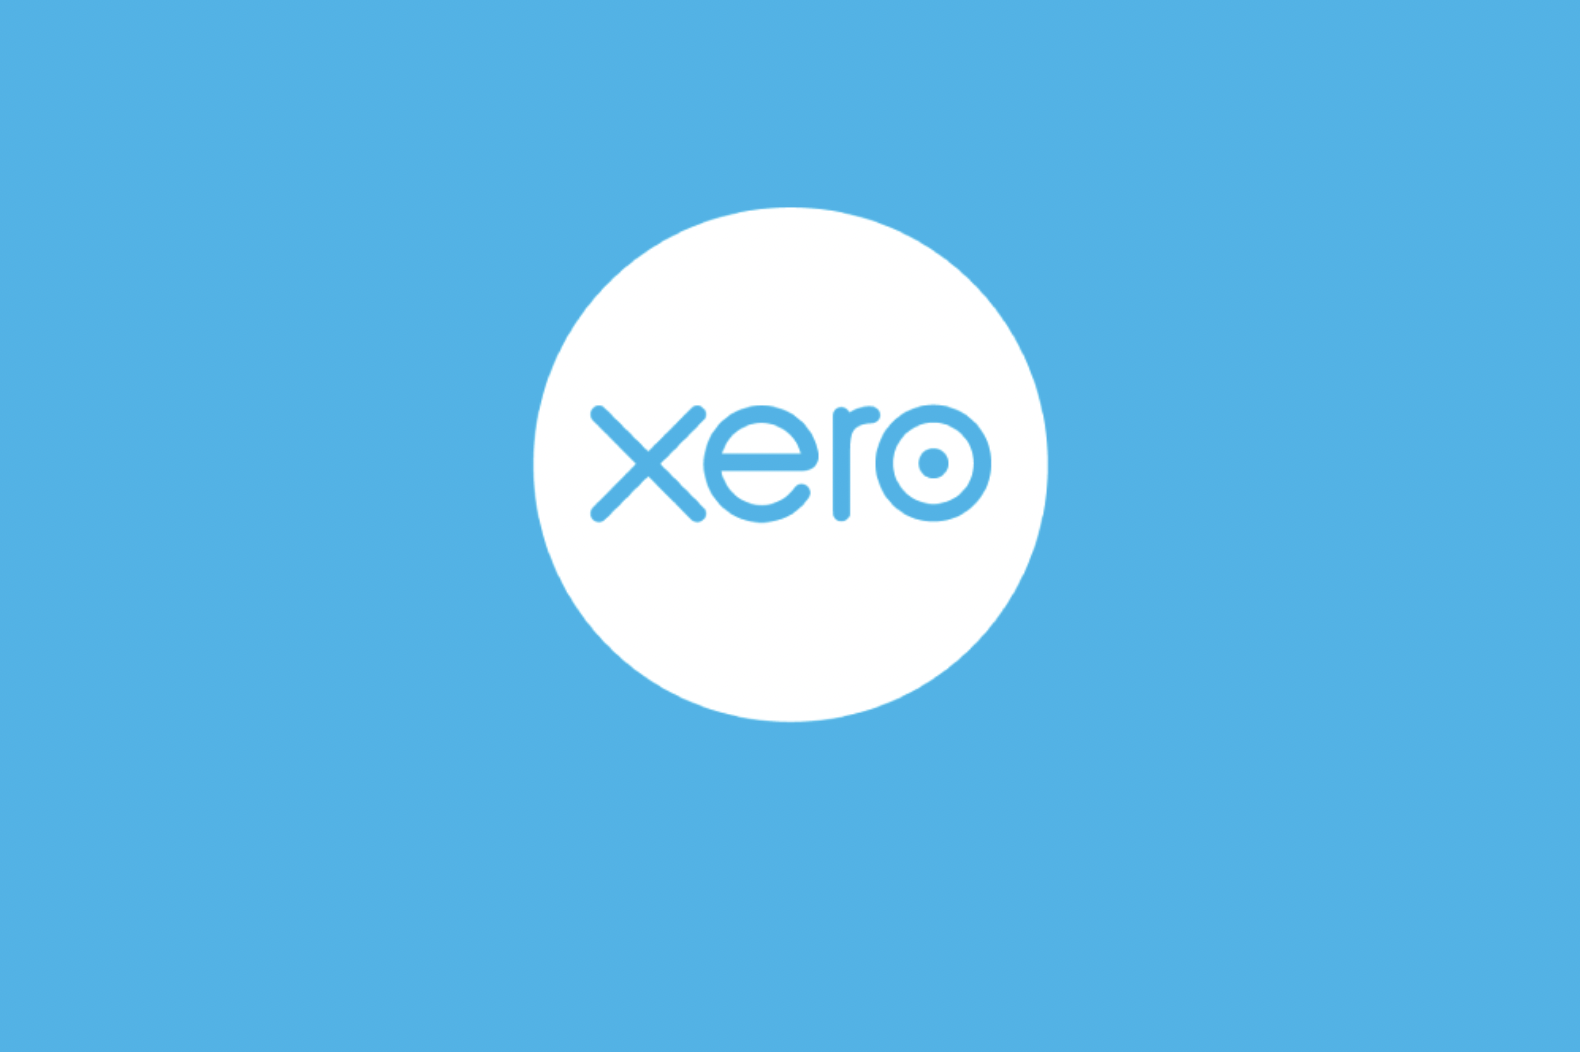 Is Xero Accounting Software Worth It? An In-Depth Review of the Tool